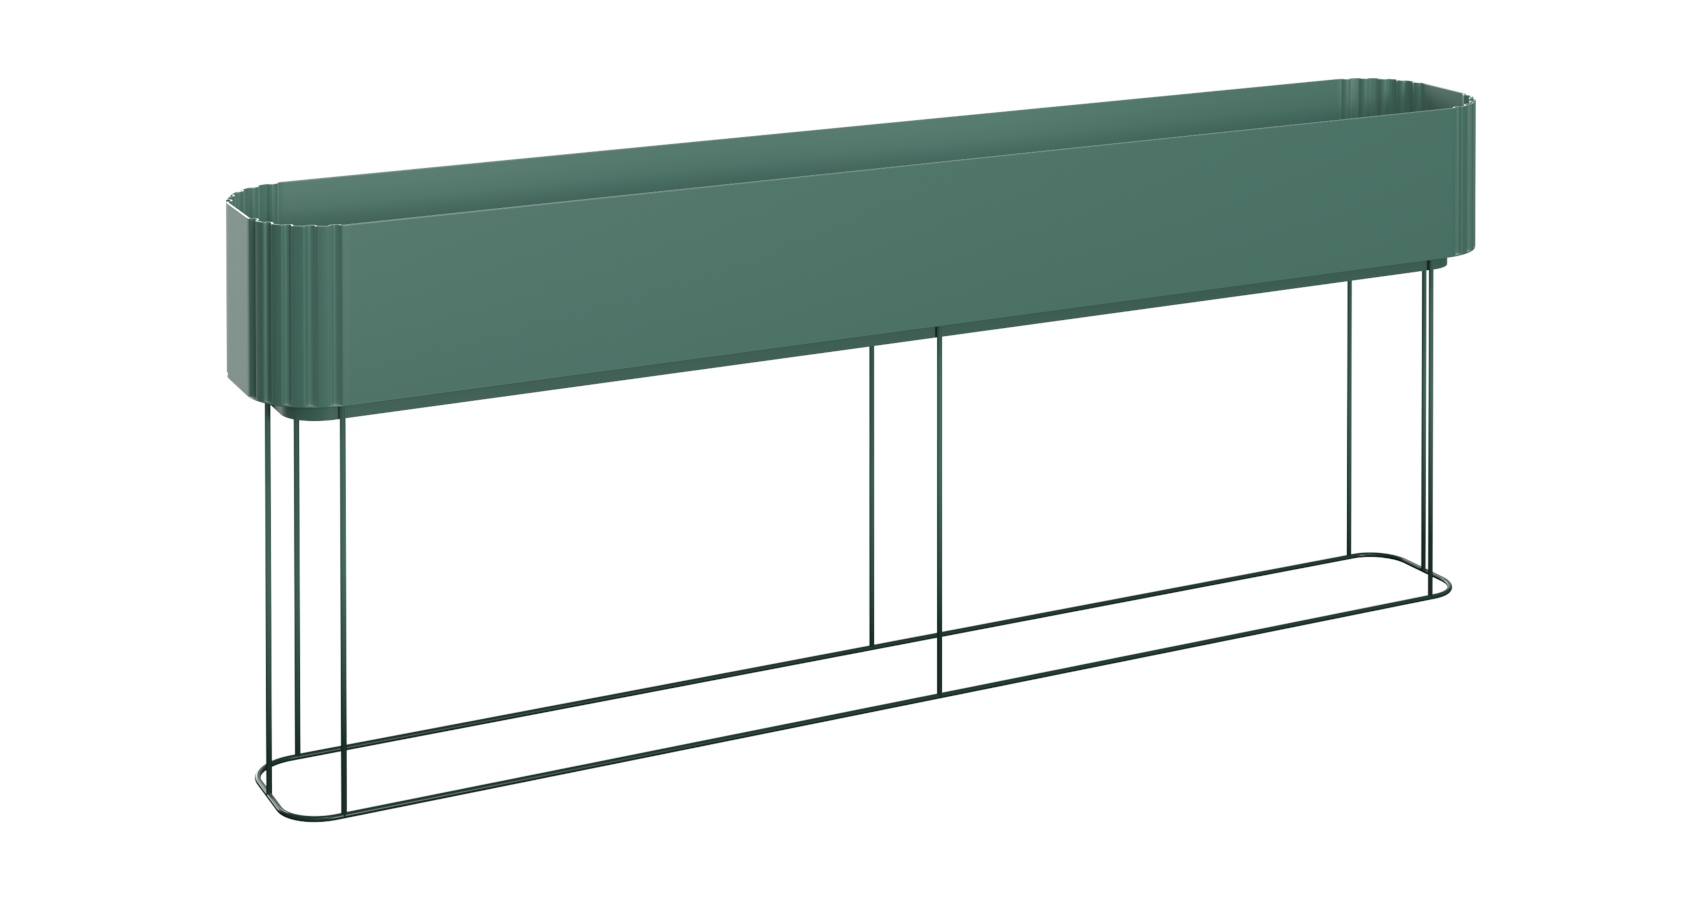 Cubby Planter in green 1500mm wide in front view